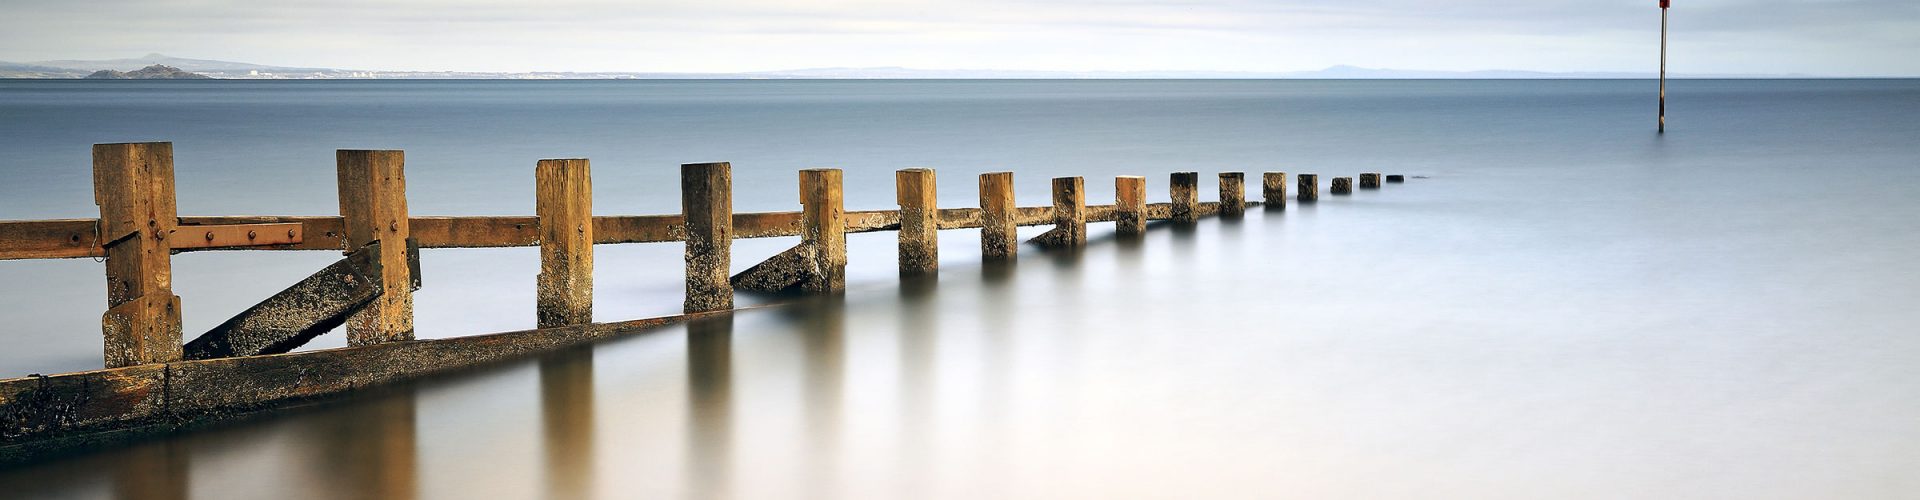 Wooden groynes leading in to the water at Portobello